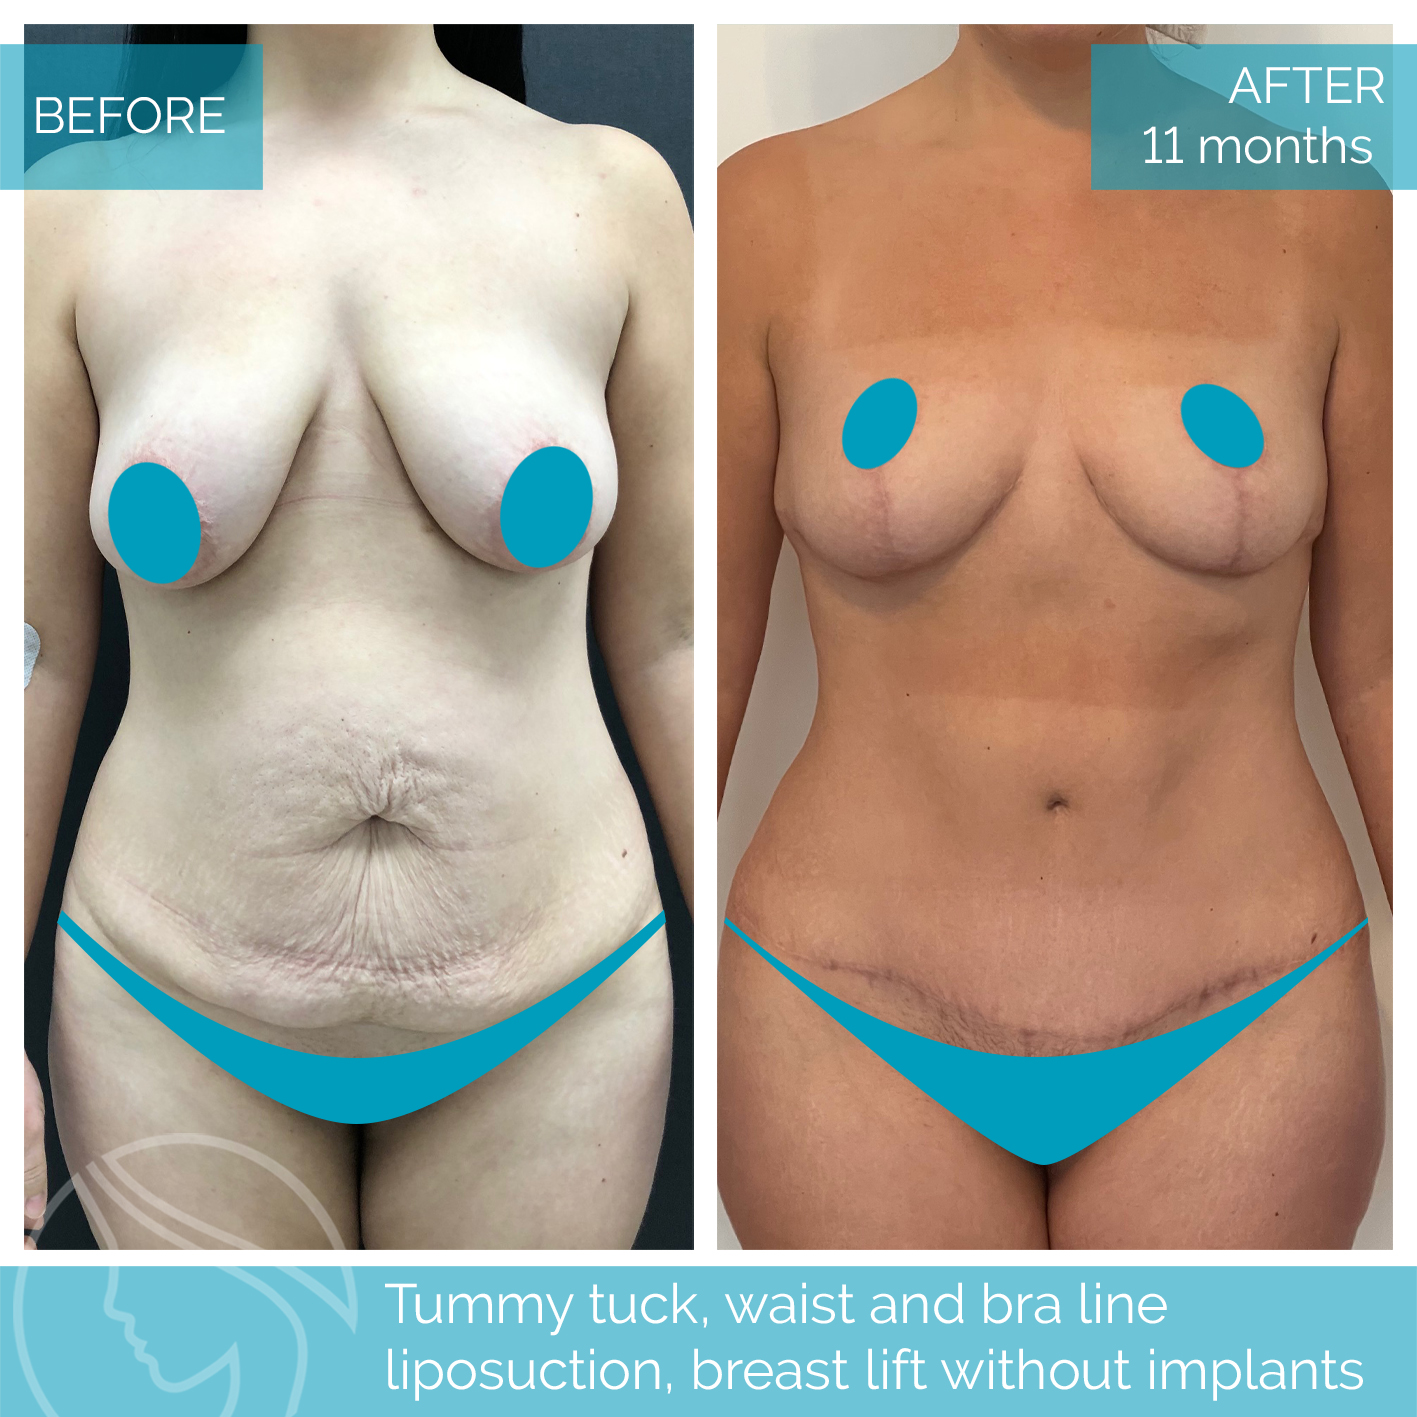 Nordesthetics Clinic on X: Patient had a #tummytuck, waist and bra line # liposuction with #breastlift. These are significant procedures, and while  the results are thrilling, we want to remind you that there